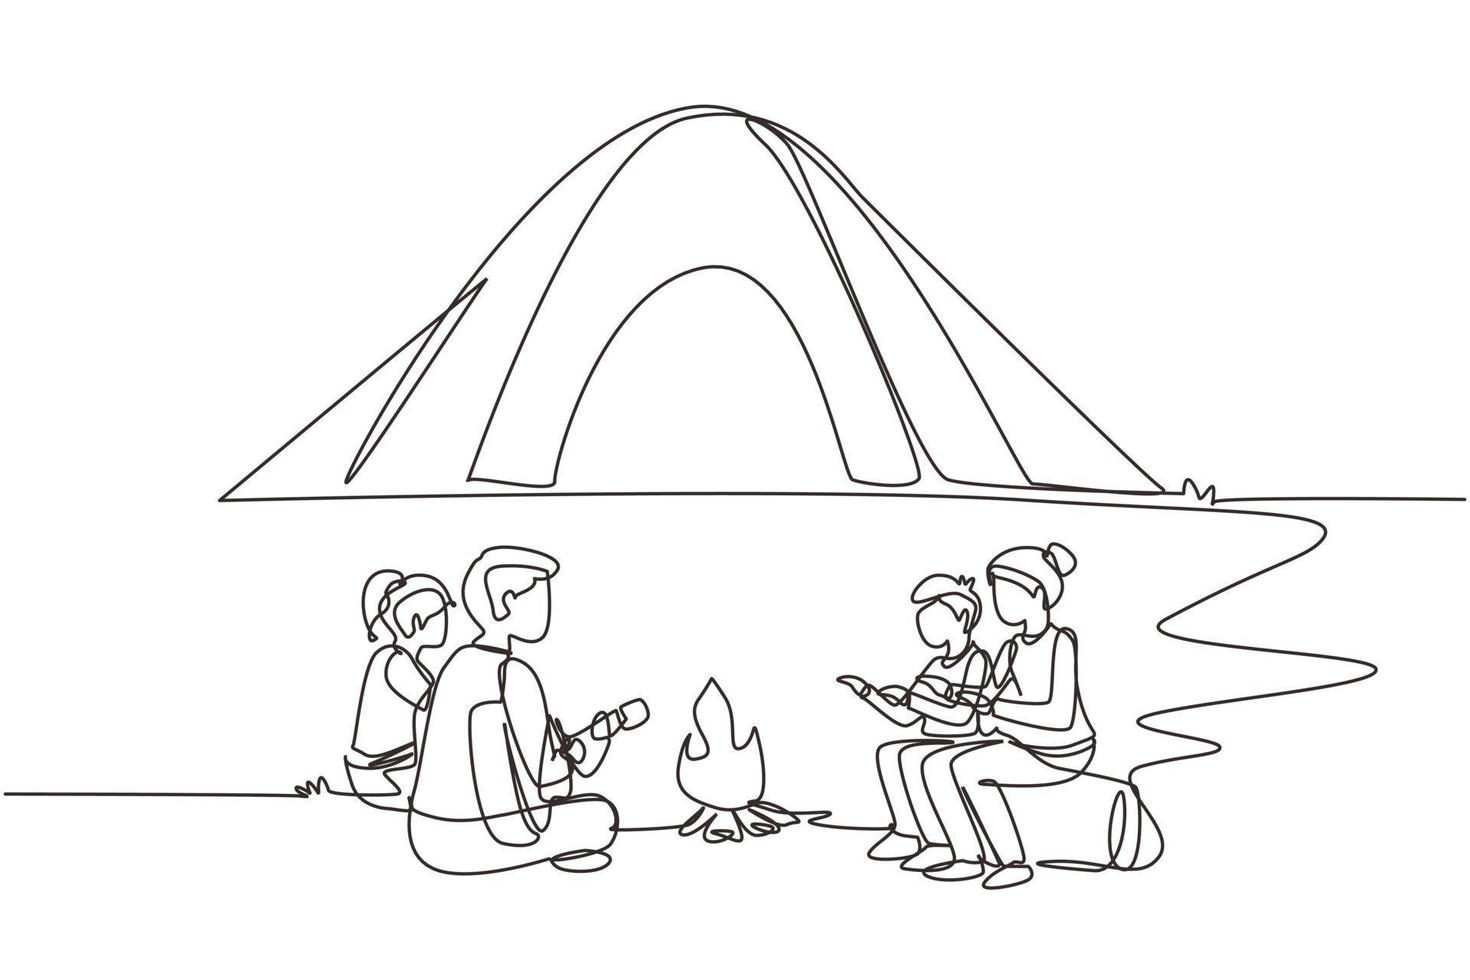 Single one line drawing camping family warm their bodies around campfire tents.  Dad playing guitar, mom and kids sitting on ground and logs, sing song. Continuous line draw design vector illustration